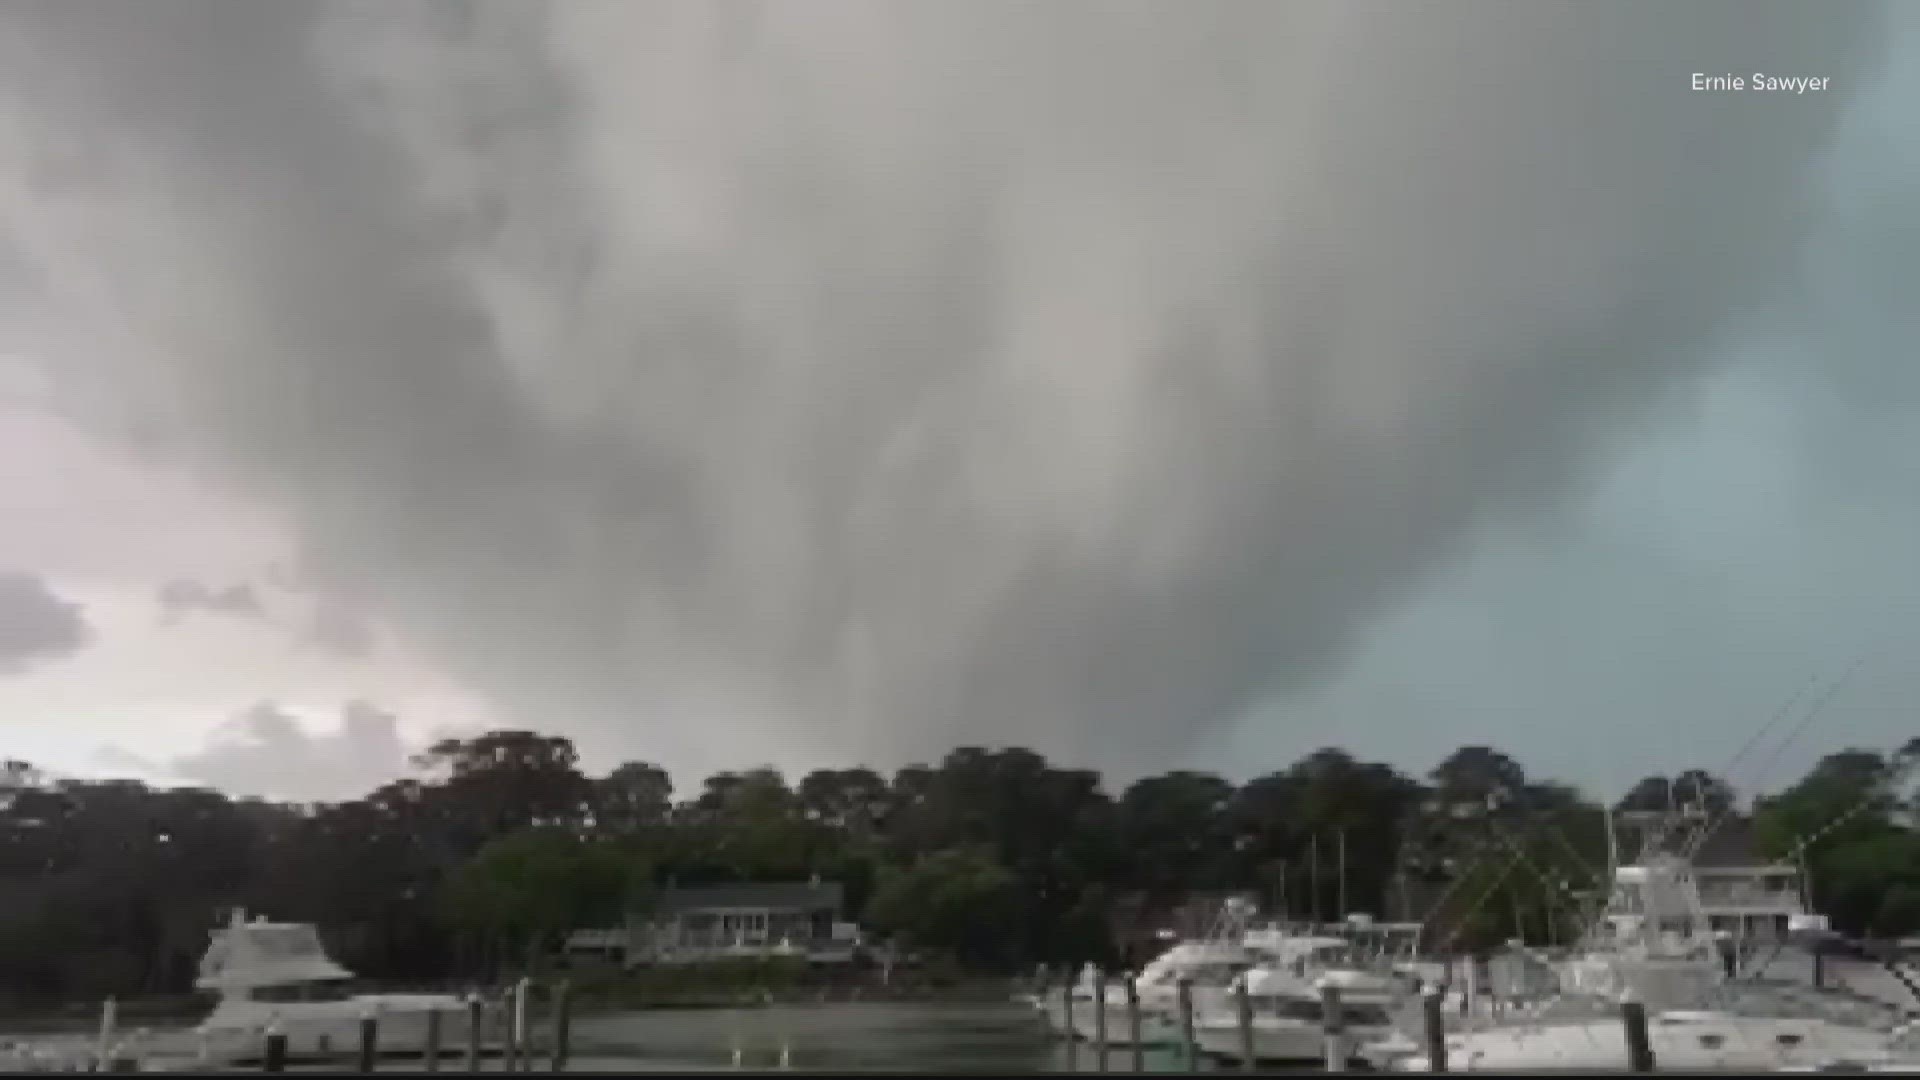 There's a local state of emergency tonight in parts of Virginia Beach, Virginia. The National Weather Service confirms an EF- 3 tornado touched down there.